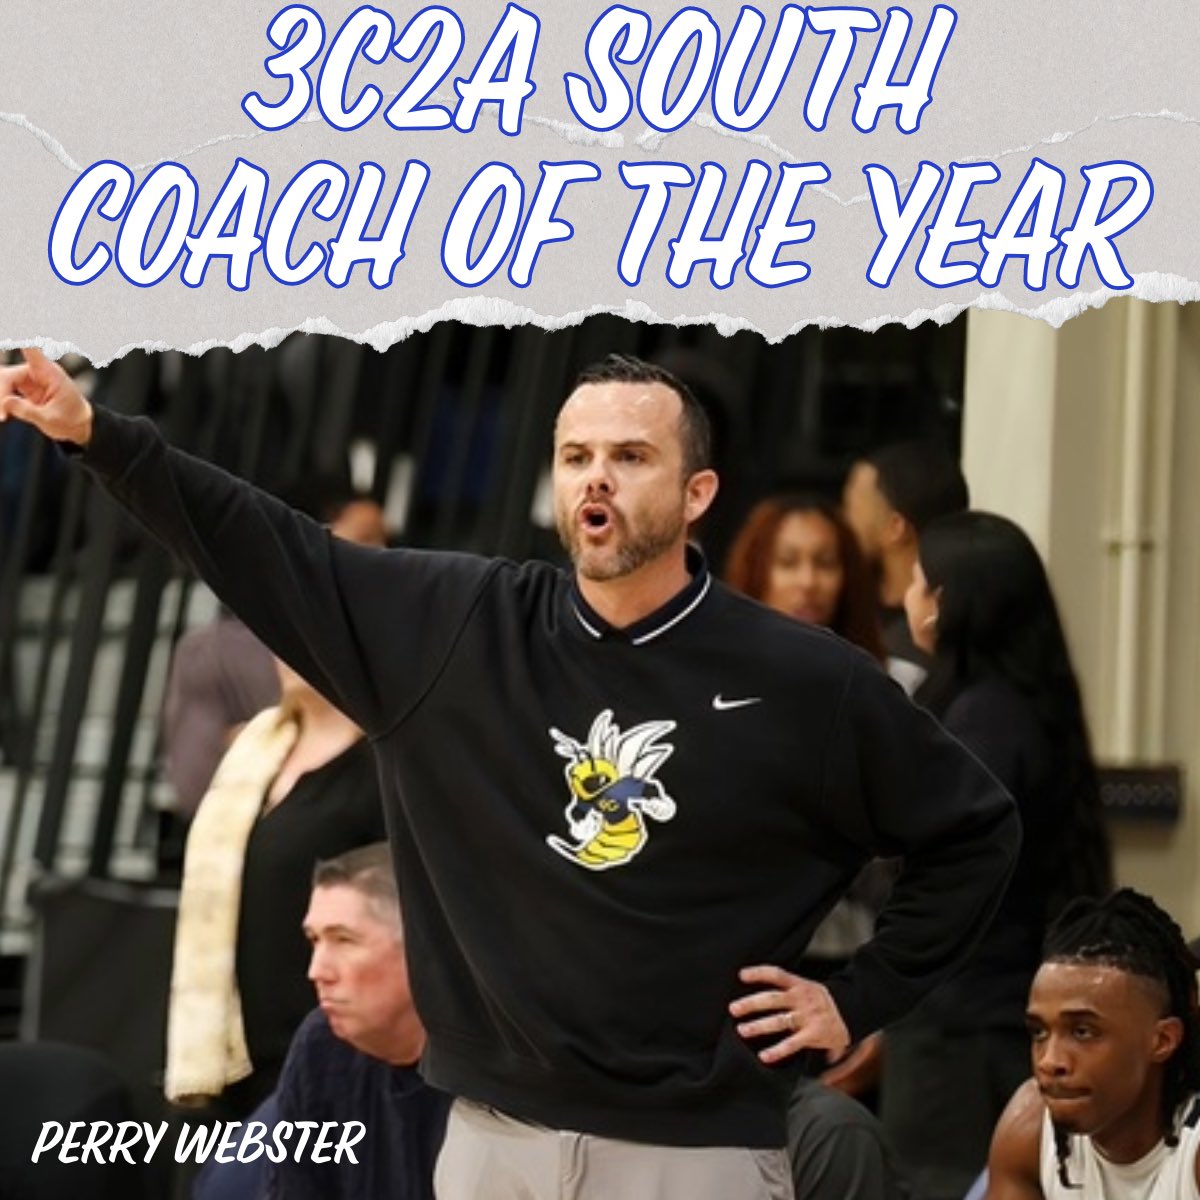 Congrats to Hornets head coach Perry Webster for earning the 3C2A South Coach of the Year award! Coach Webster led us to a 27-5 overall record, an Orange Empire Conference Championship, The No. 1 playoff seed in the South and an appearance in the Final Four. #GoHornets!